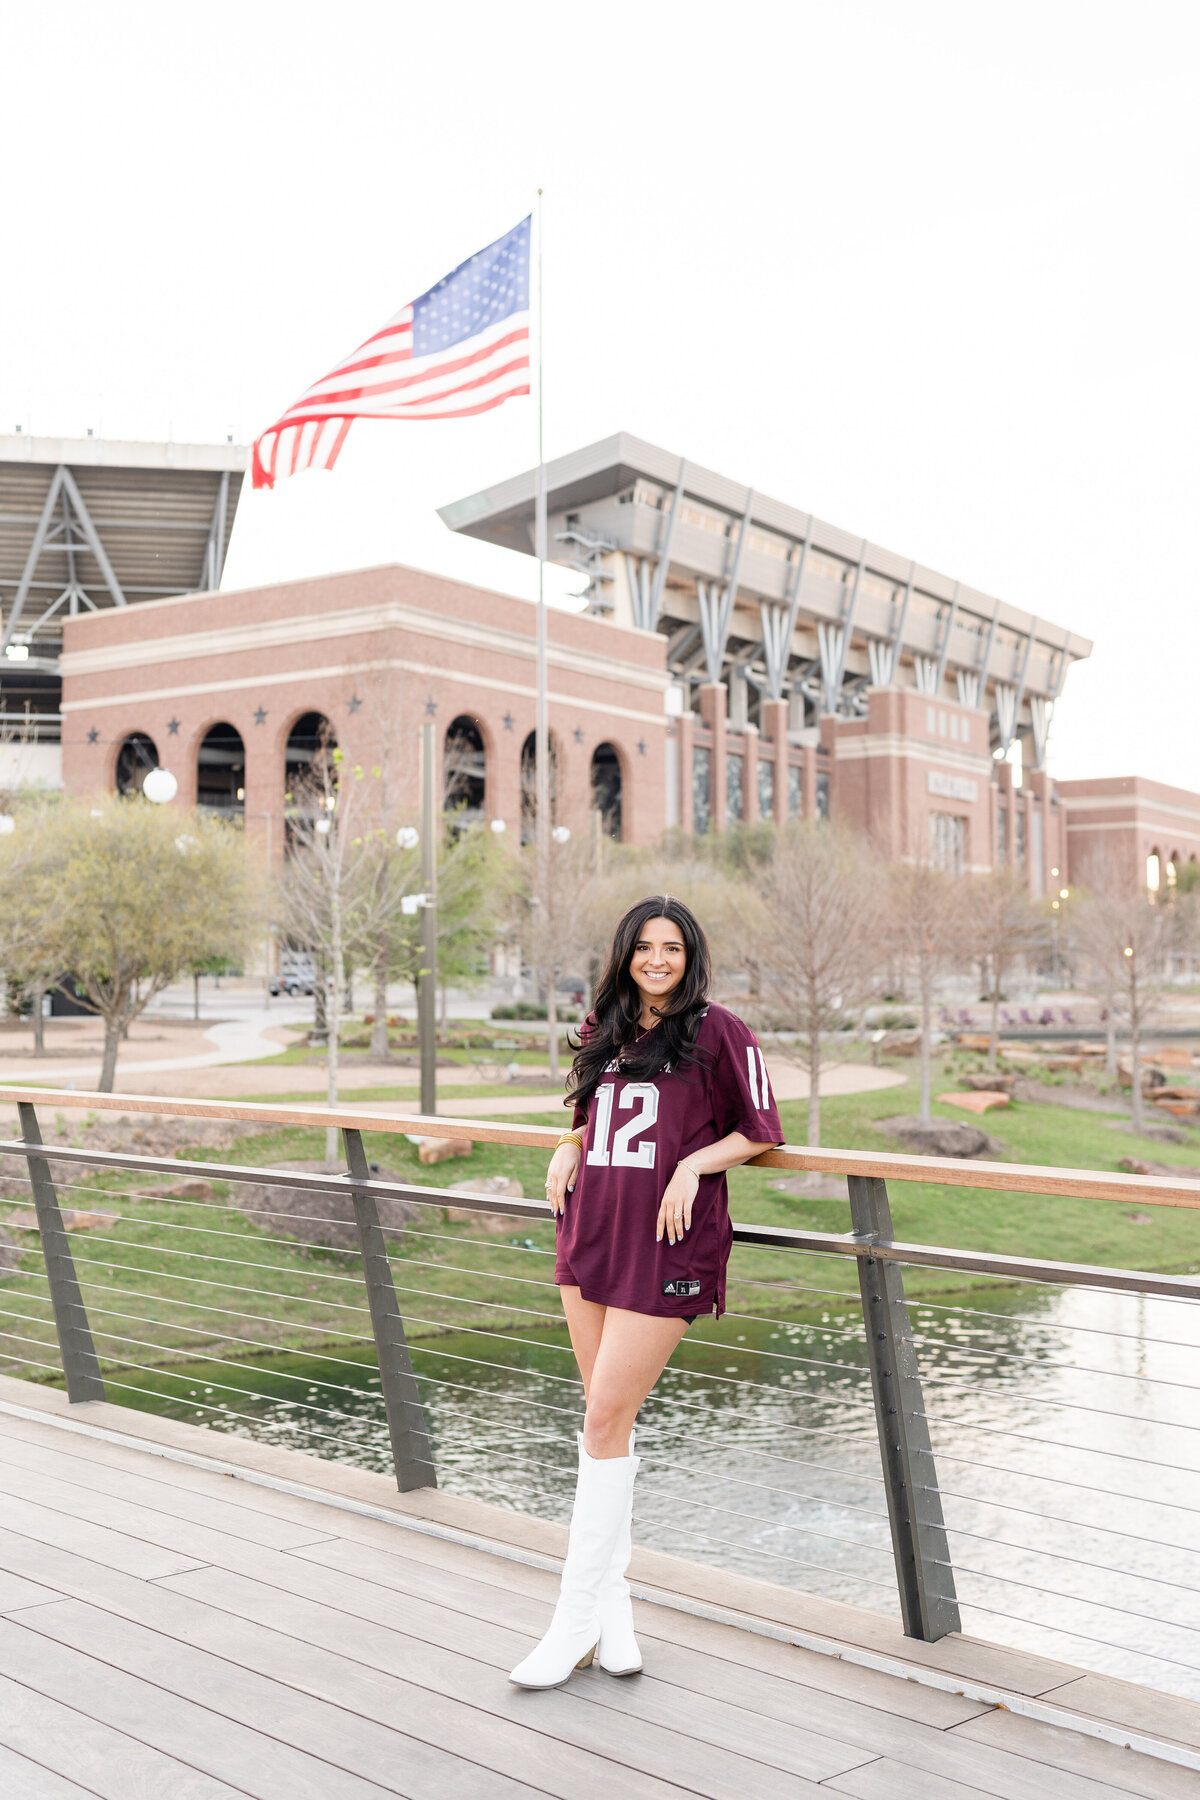 Texas A&M senior girl leaning against bridge railing with Kyle Field in the background while wearing white boots and maroon Aggie jersey